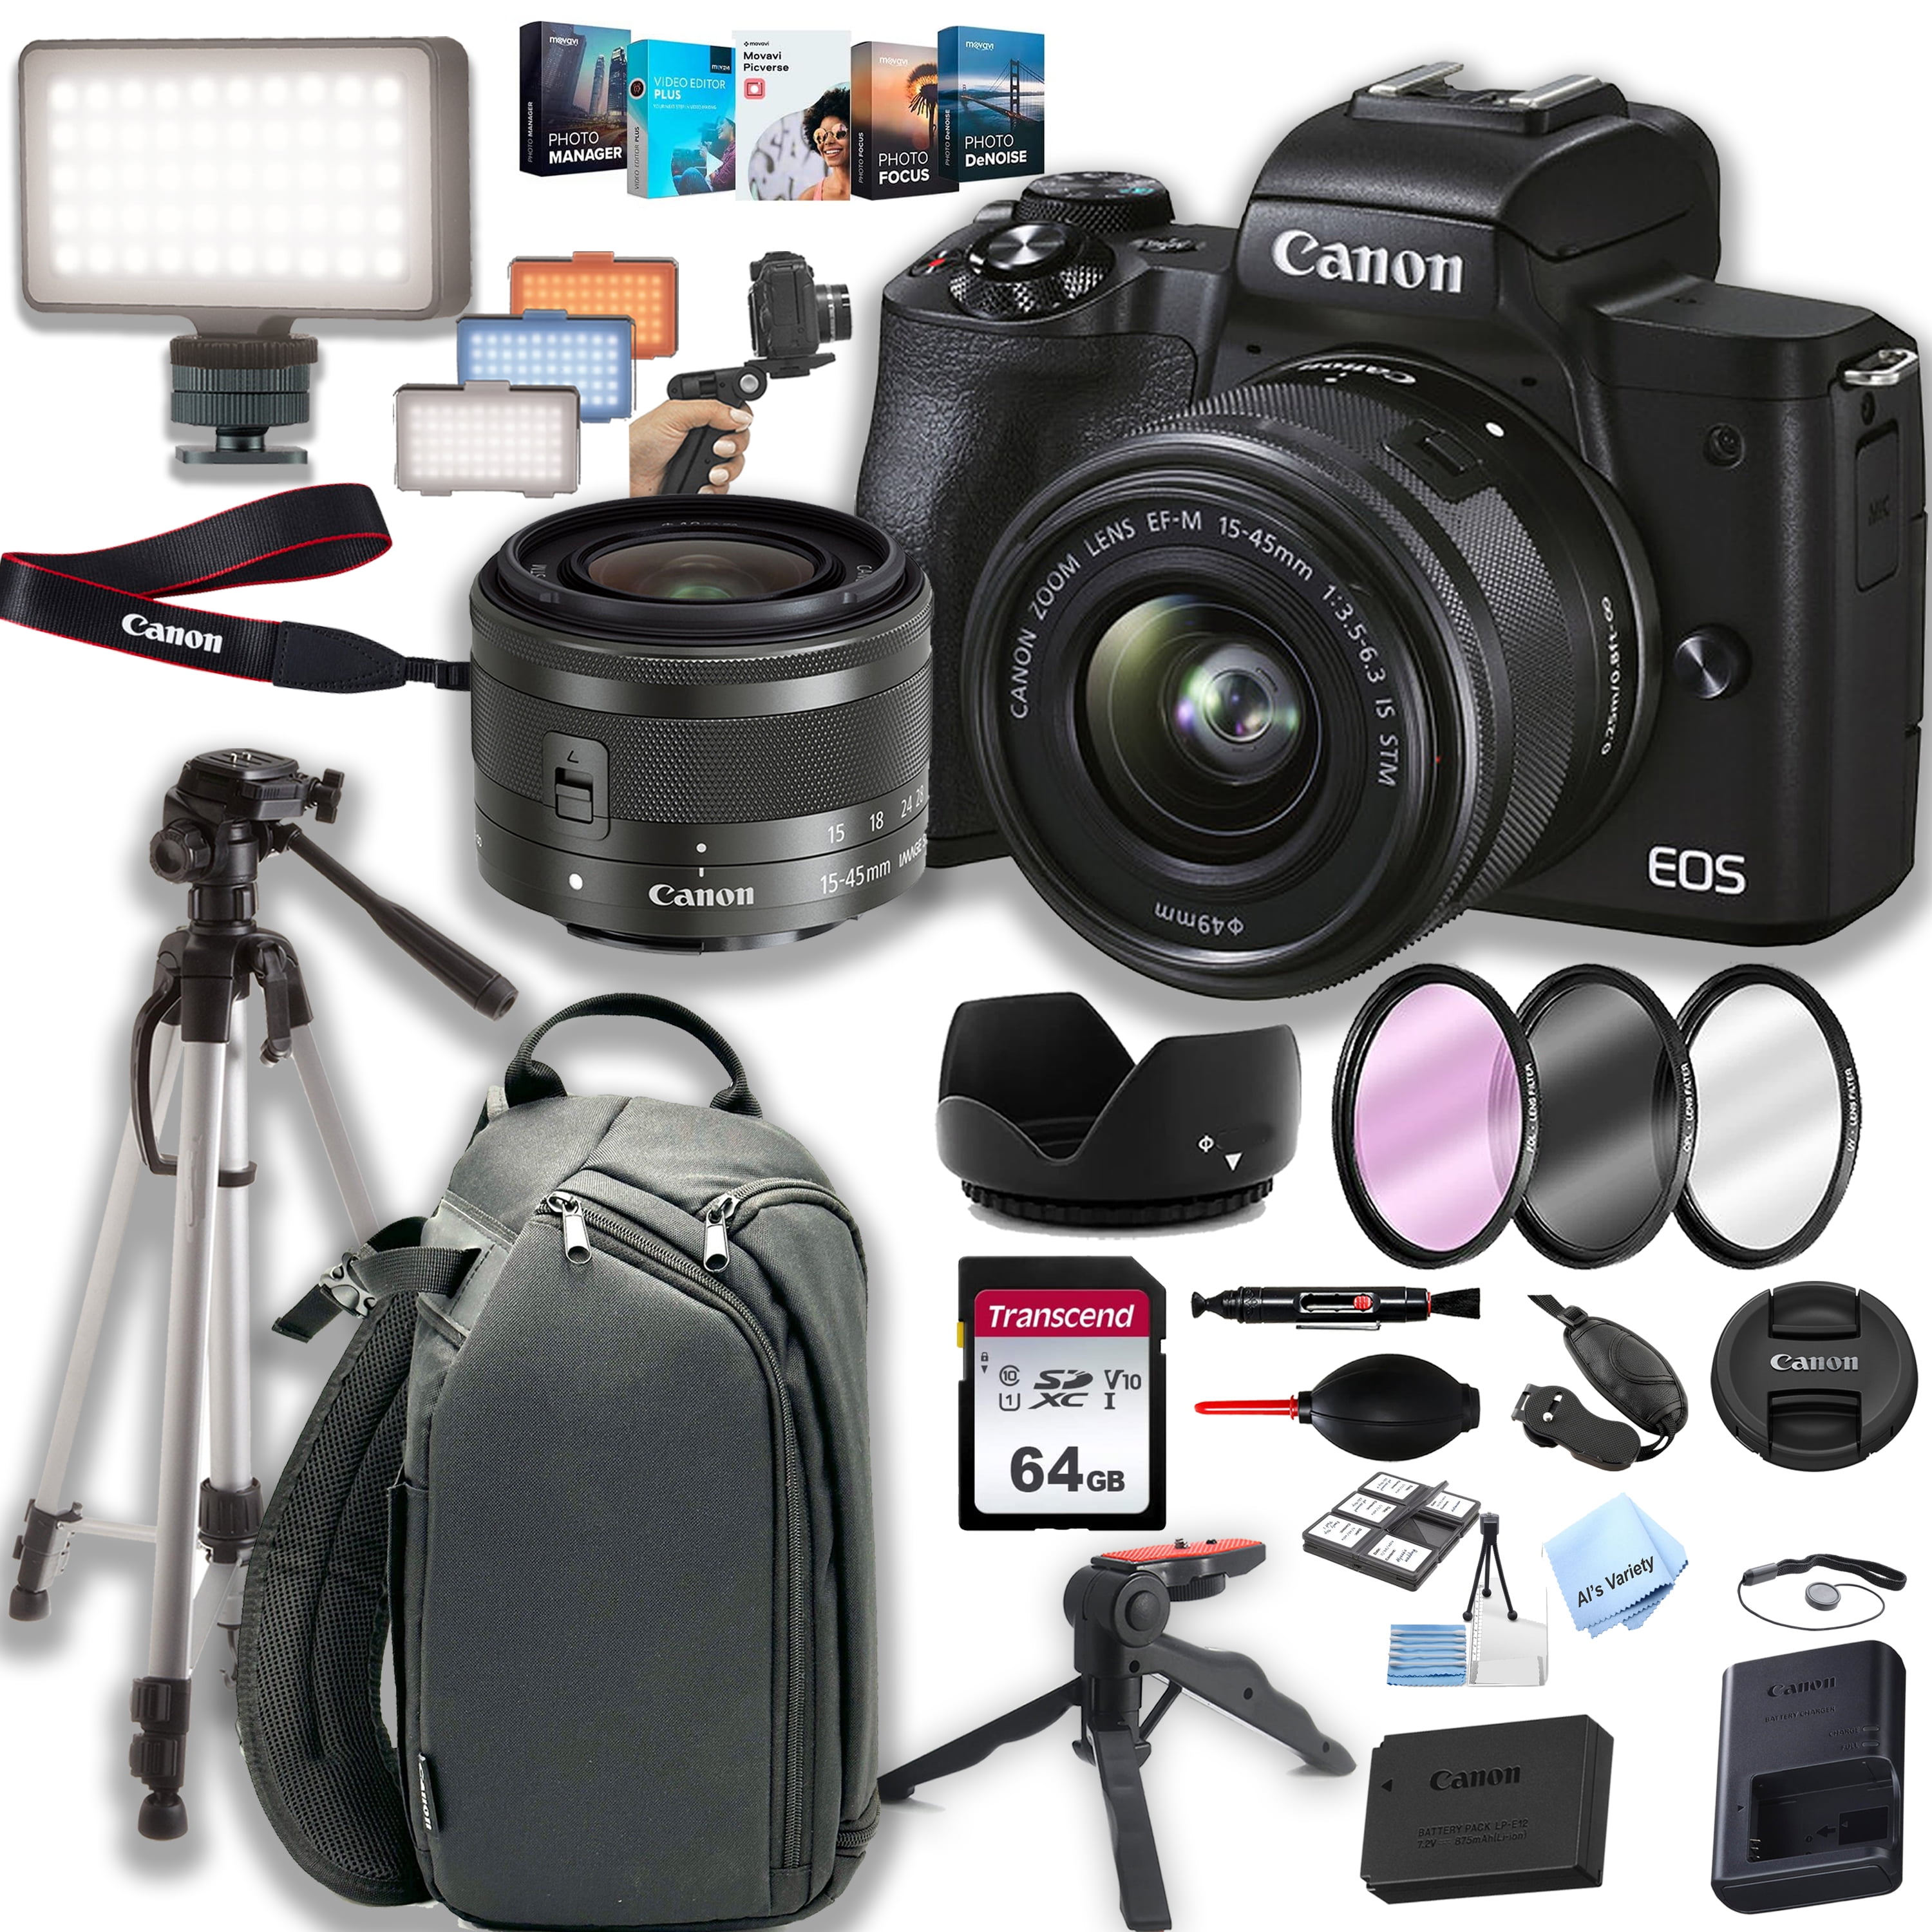 Canon EOS M50 Mark II Mirrorless Camera with 15-45mm Lens (Black) with Free  Acc. 4728C006 B